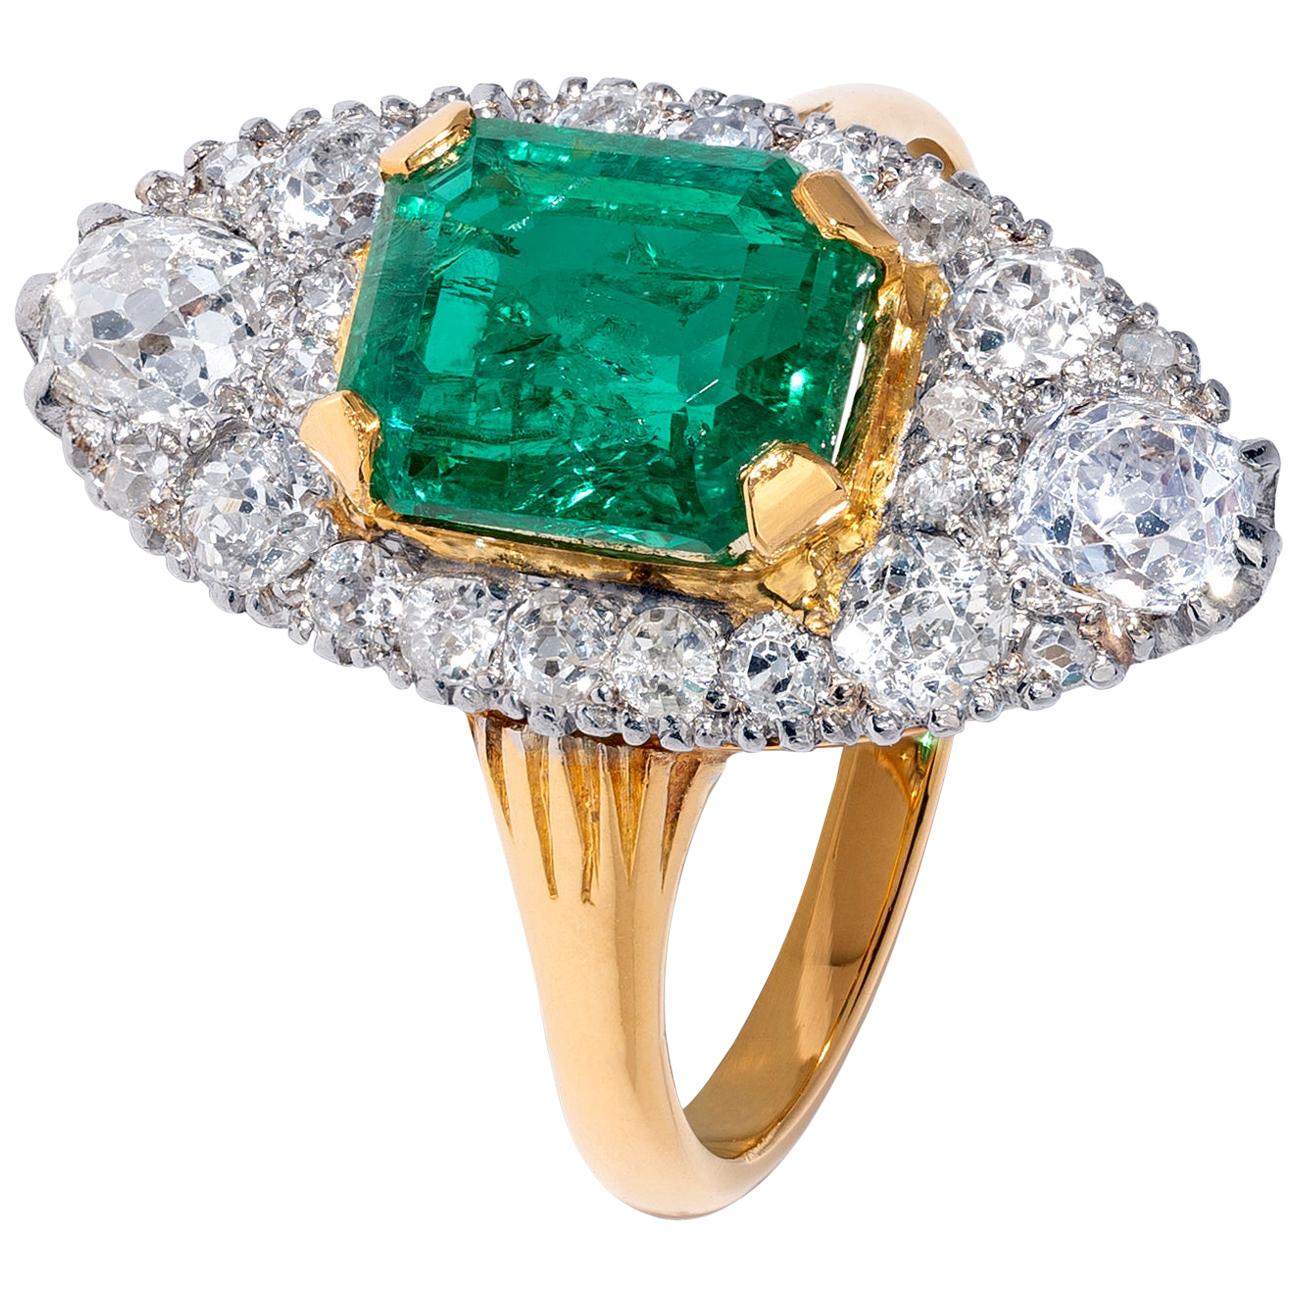 Unique Yellow Gold 2.49 Carat Emerald Ring with White Diamonds